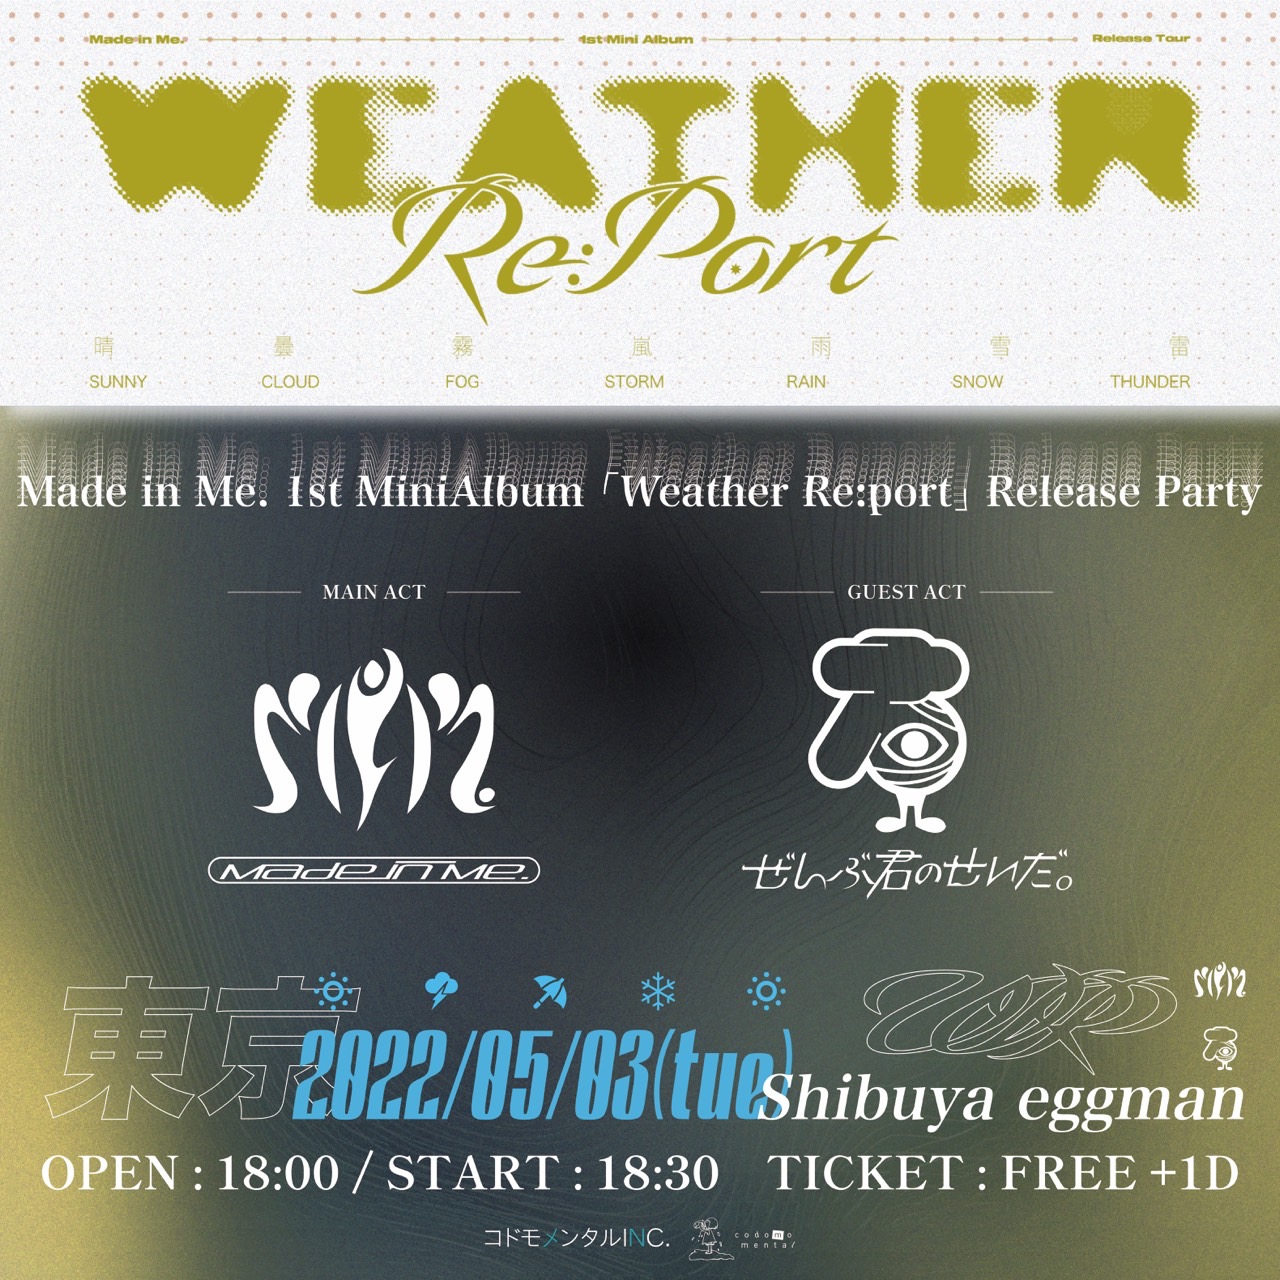 Made in Me. 1st mini album「Weather Re:port」Release Party